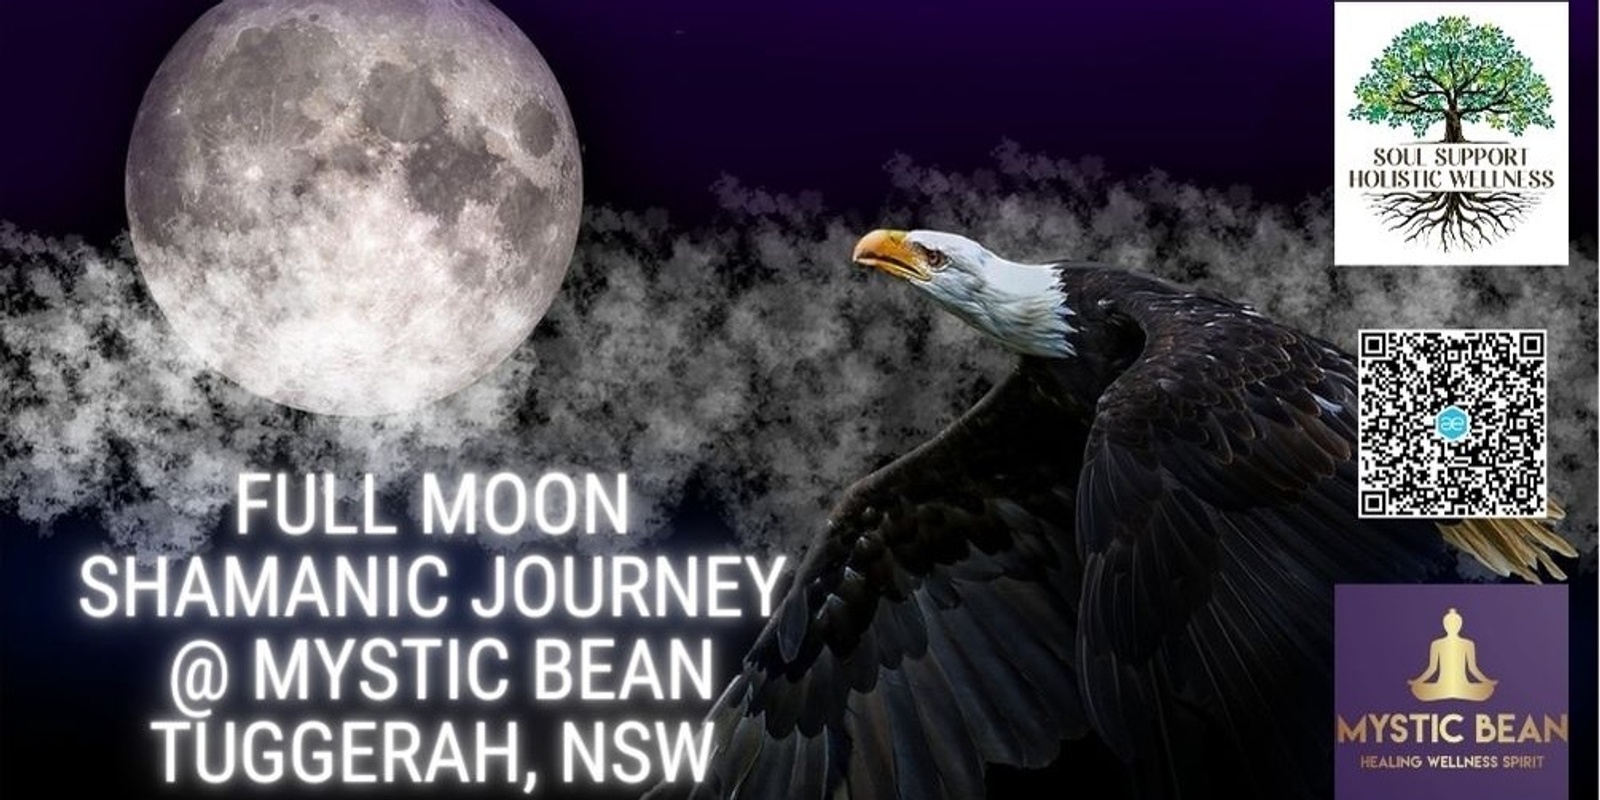 Banner image for Full Moon Shamanic Journey and Sound Healing @ Mystic Bean